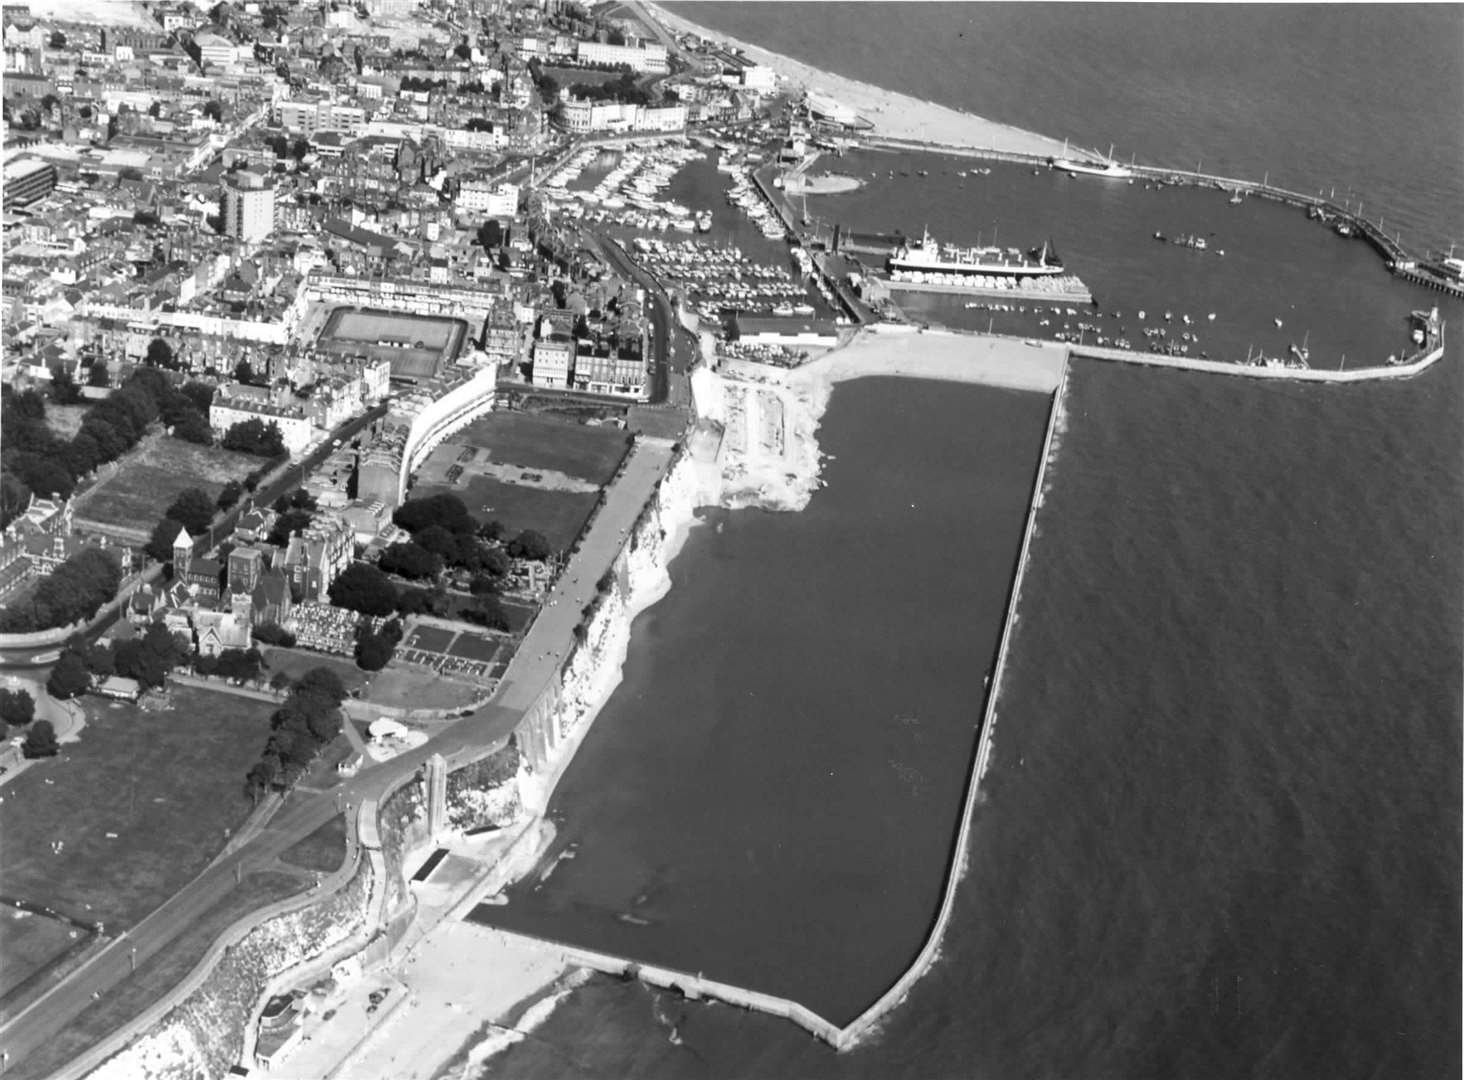 A bird's-eye view of Ramsgate in 1979. The large lido is in the foreground, with the Royal Harbour beyond